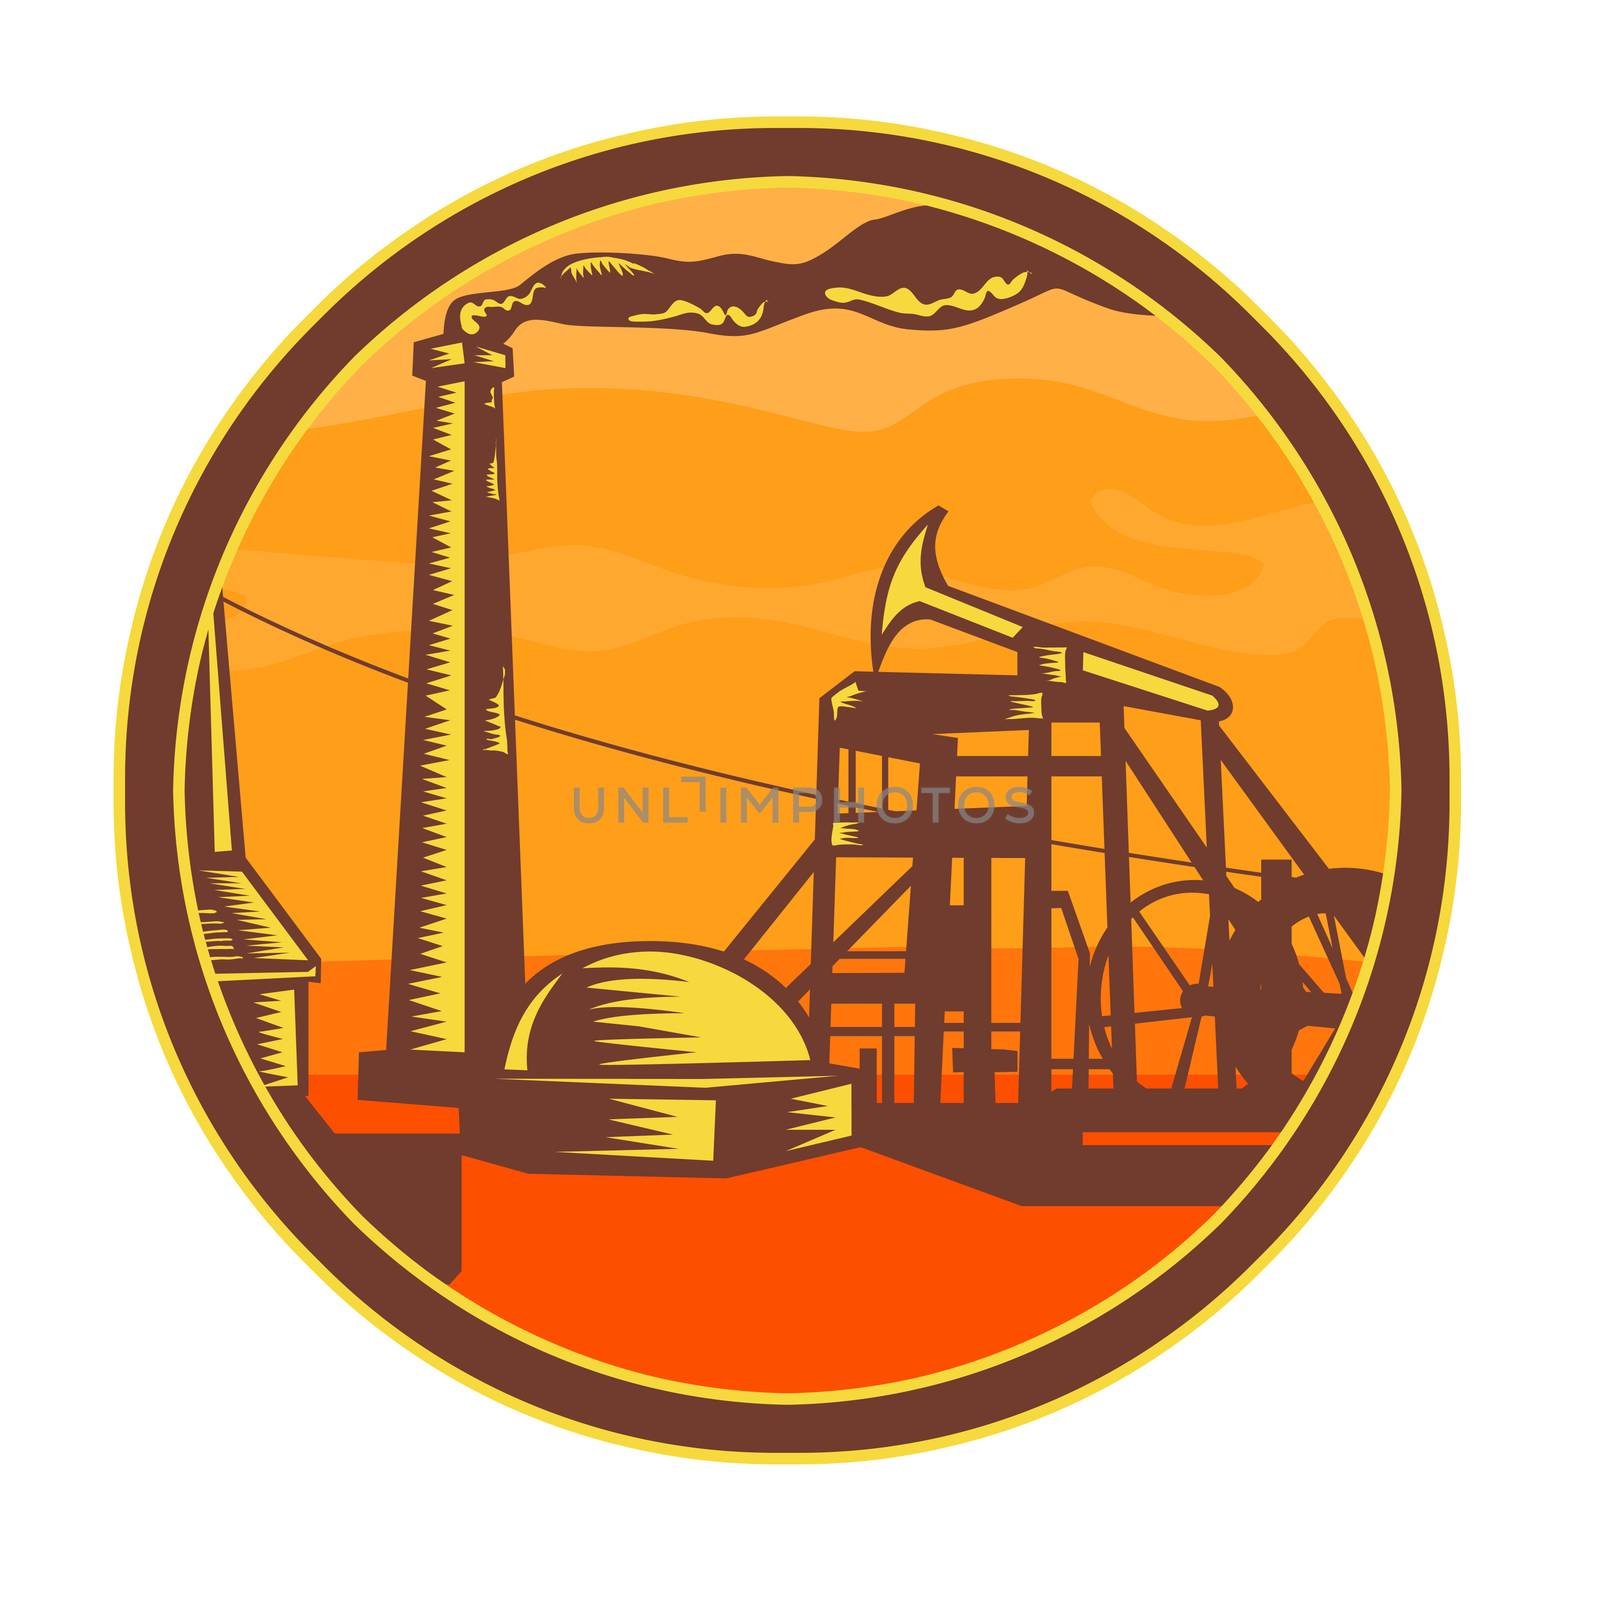 Icon retro style illustration of an industrial revolution oil well or mine head with steam engine driven pumpjack set inside circle on isolated background.